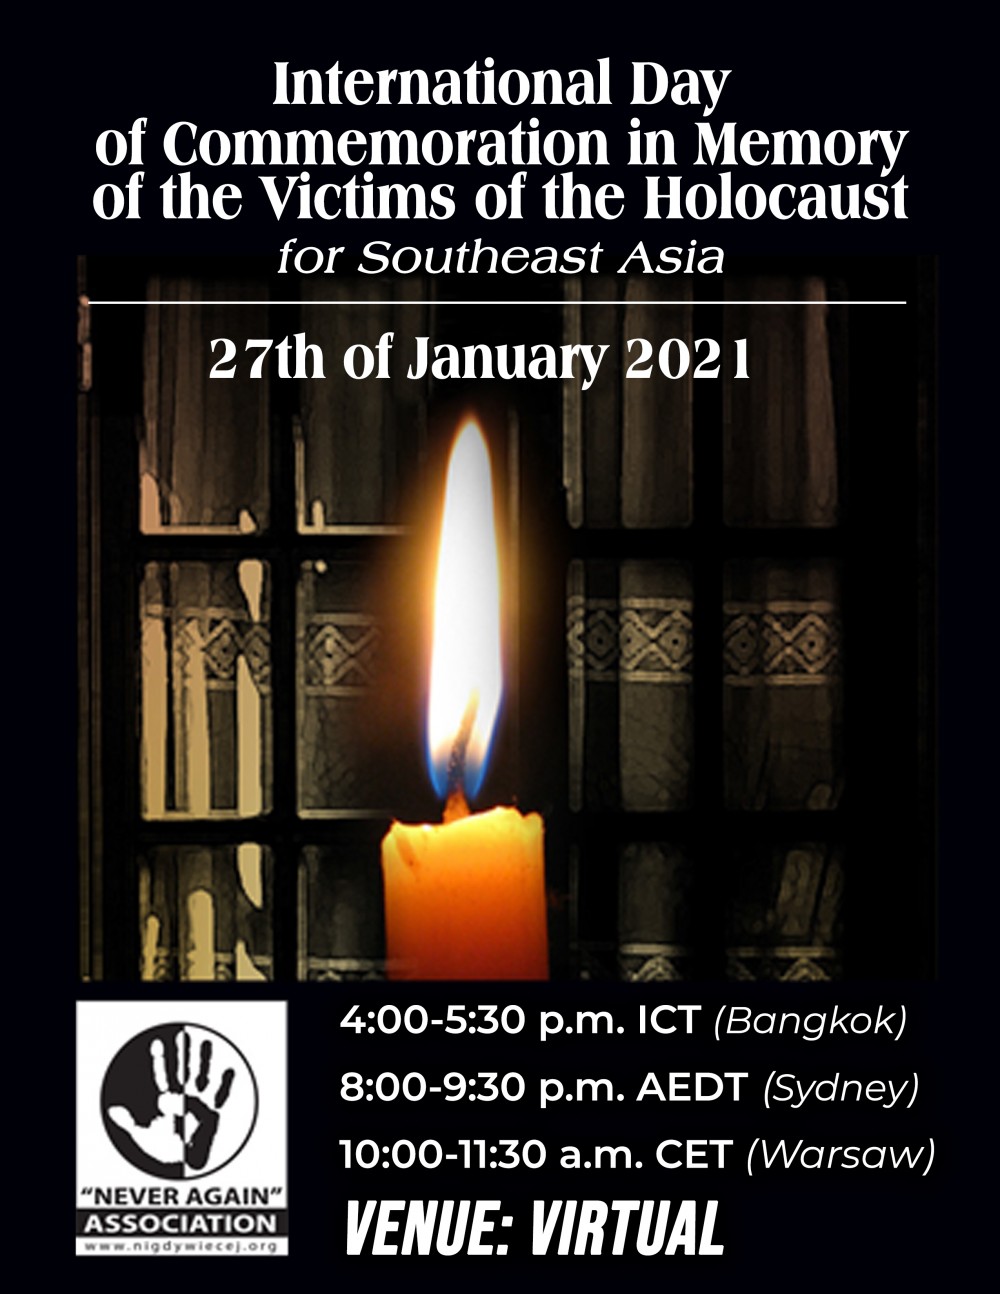 INTERNATIONAL DAY OF COMMEMORATION IN MEMORY OF THE VICTIMS OF THE HOLOCAUST FOR SOUTHEAST ASIA